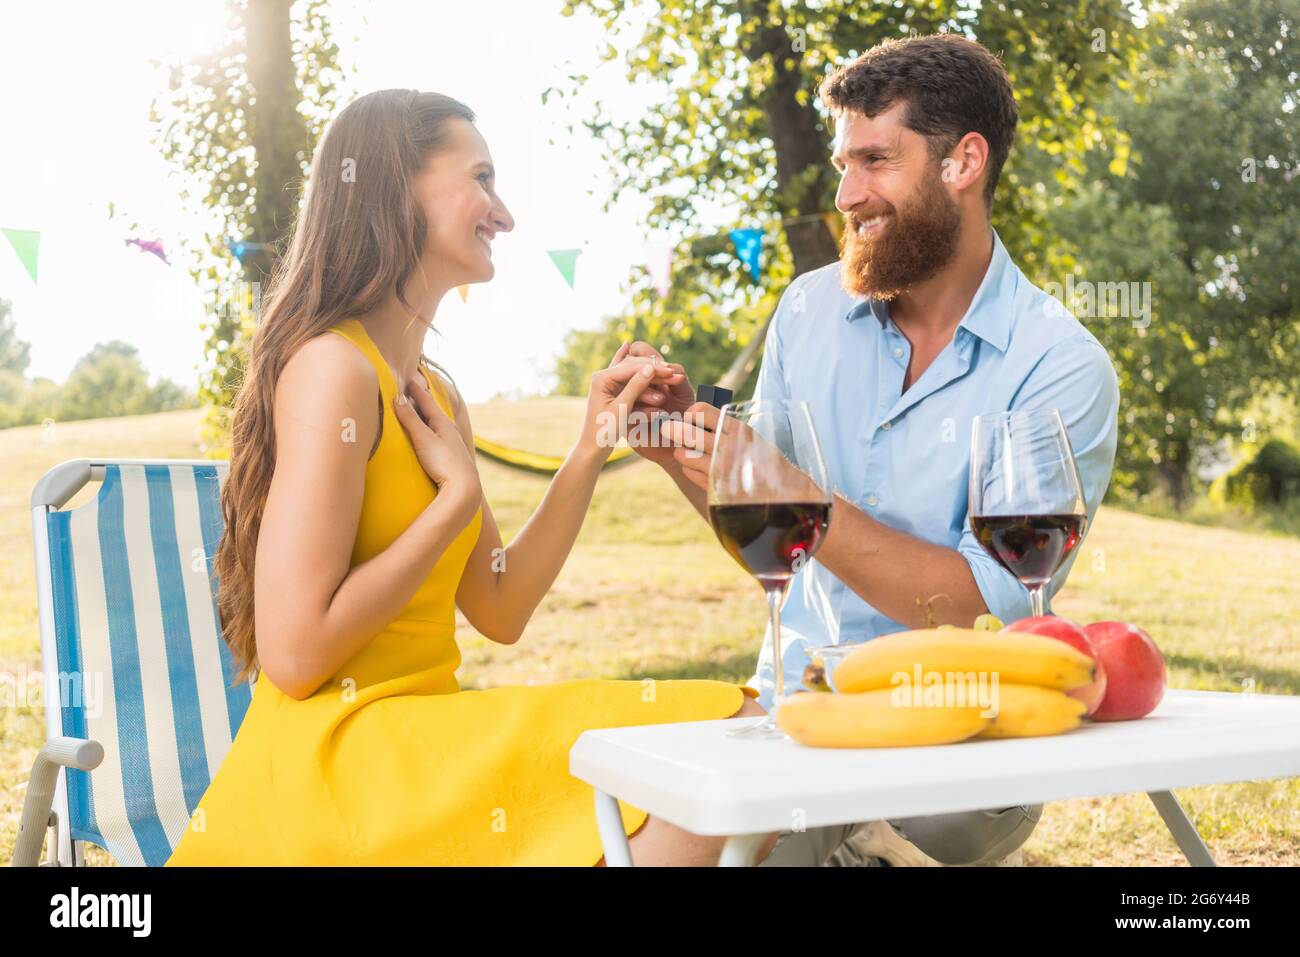 Beautiful young woman accepting with joy and emotion the marriage proposal from her boyfriend during romantic picnic in a sunny day of summer Stock Photo